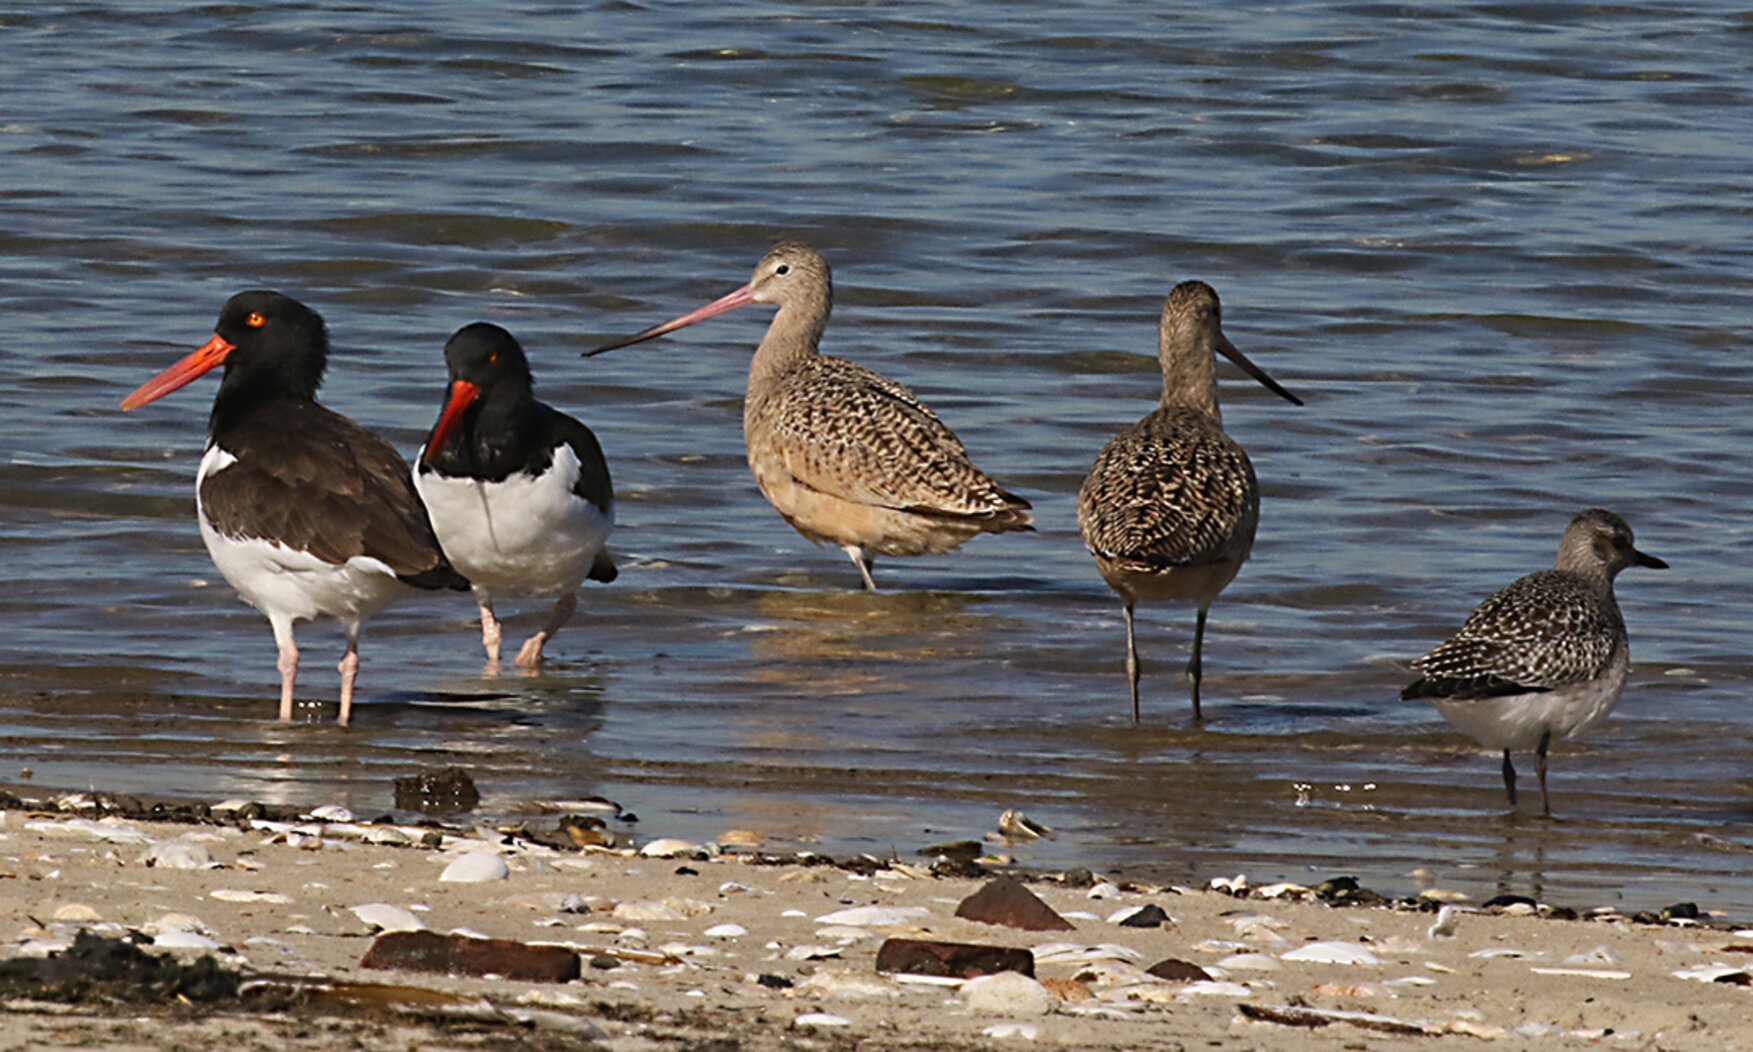 Marbled Godwits mingle with American Oystercatchers and a Black-bellied Plover in the Jamaica Bay Wildlife Refuge. Photo: Don Riepe